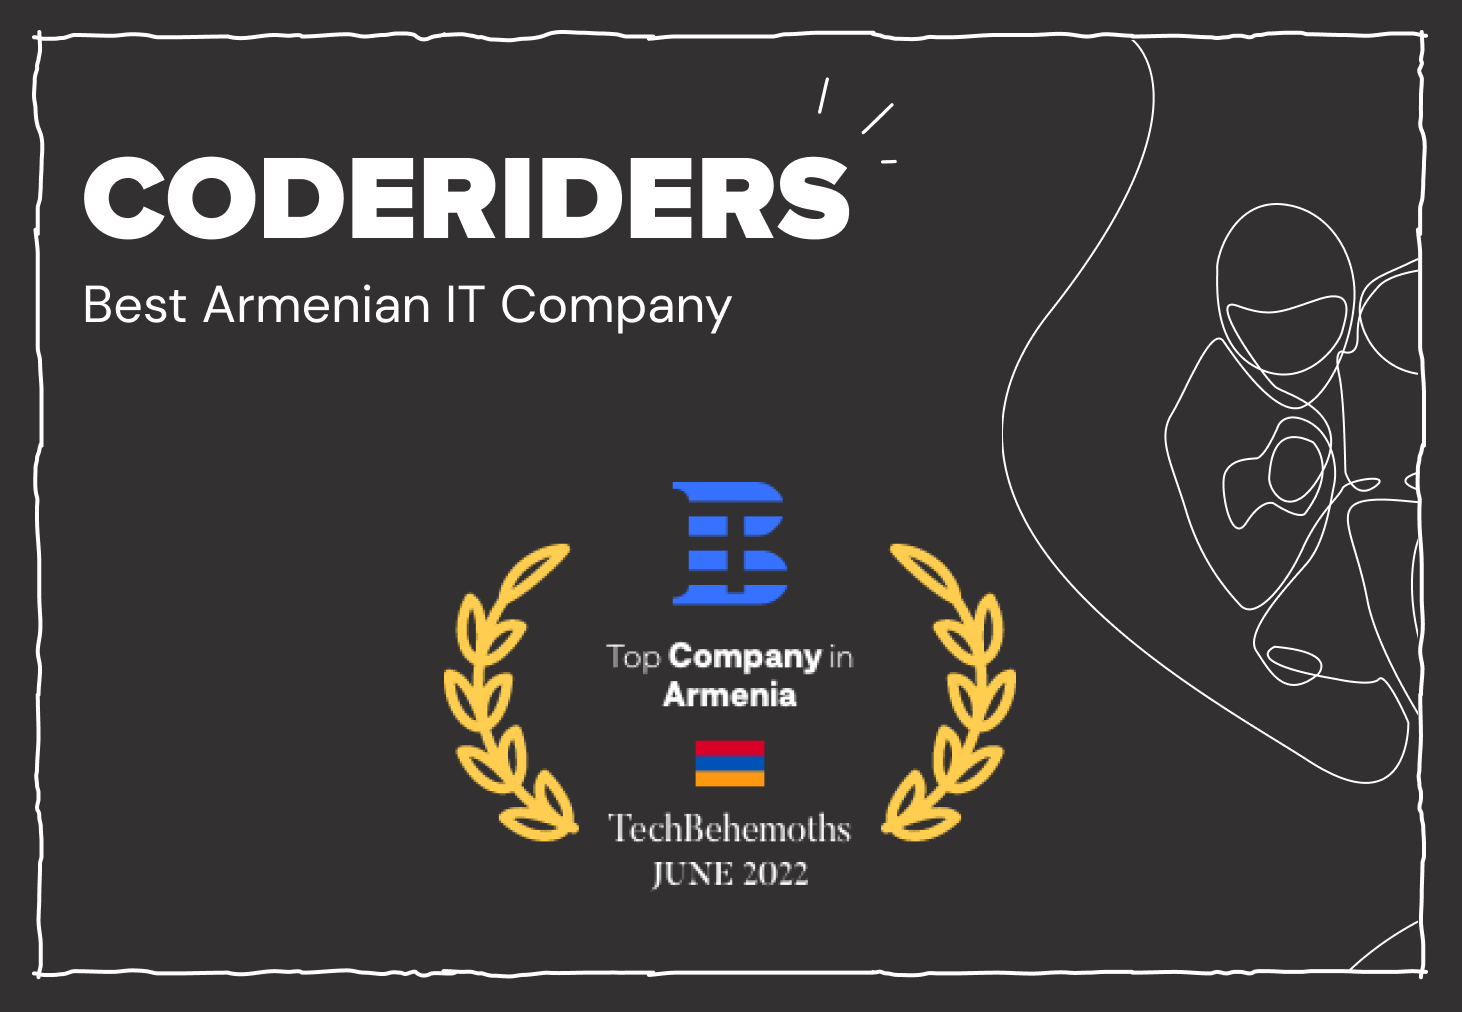 CodeRiders is among the best IT companies by Tech Behemoths for the high-quality software development and design services provided by its software engineers, designers